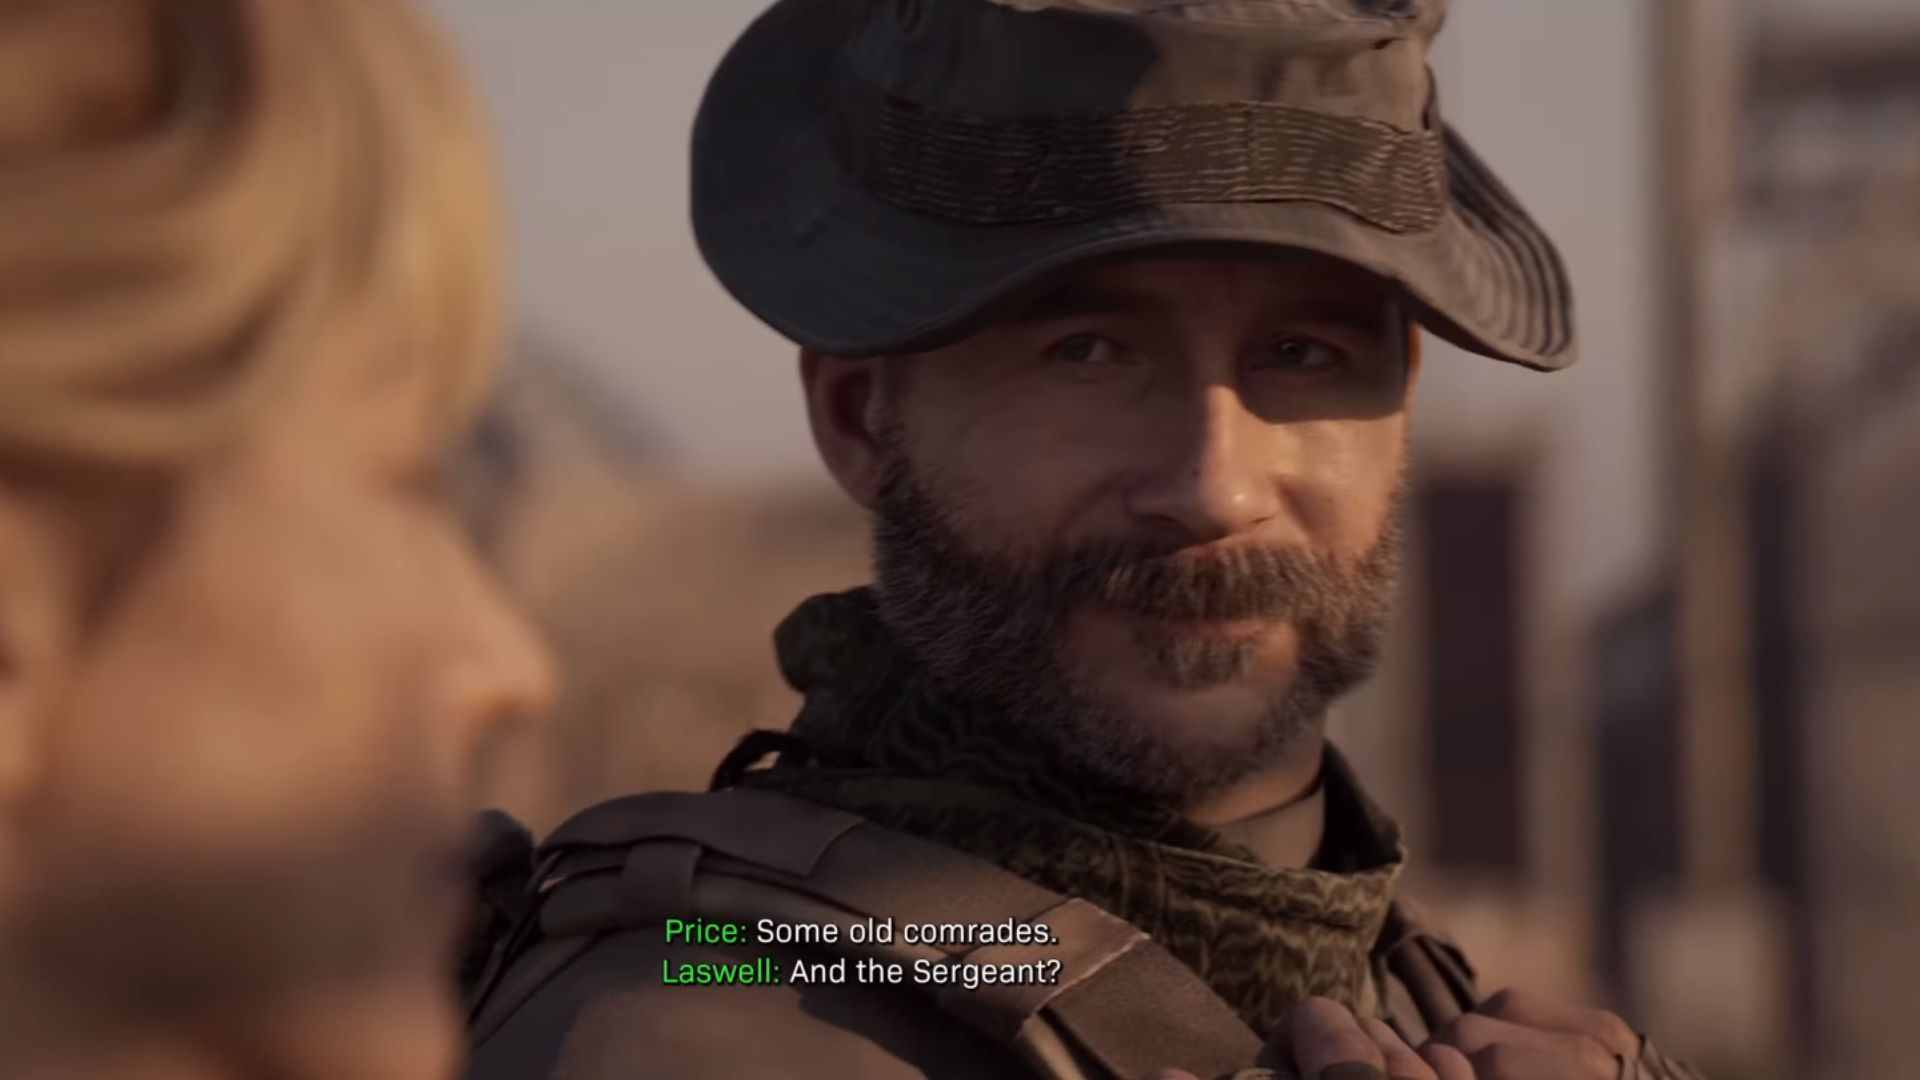 Who does Modern Warfare's Captain Price really “get dirty”